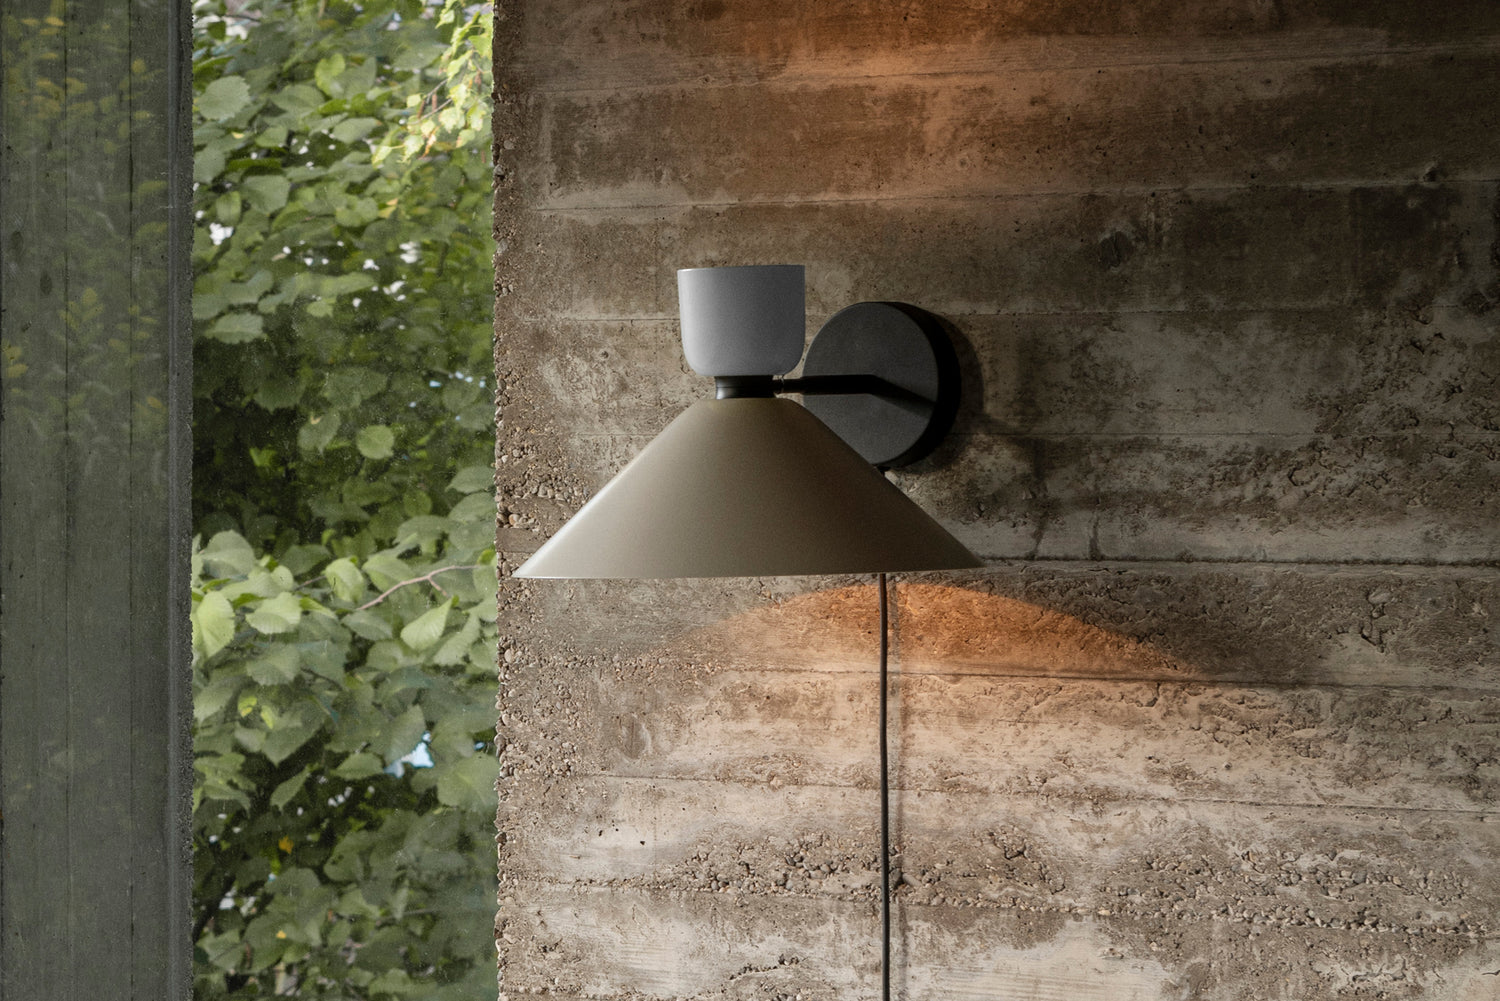 An Alphabeta Wall Light + Cable against a stone wall.